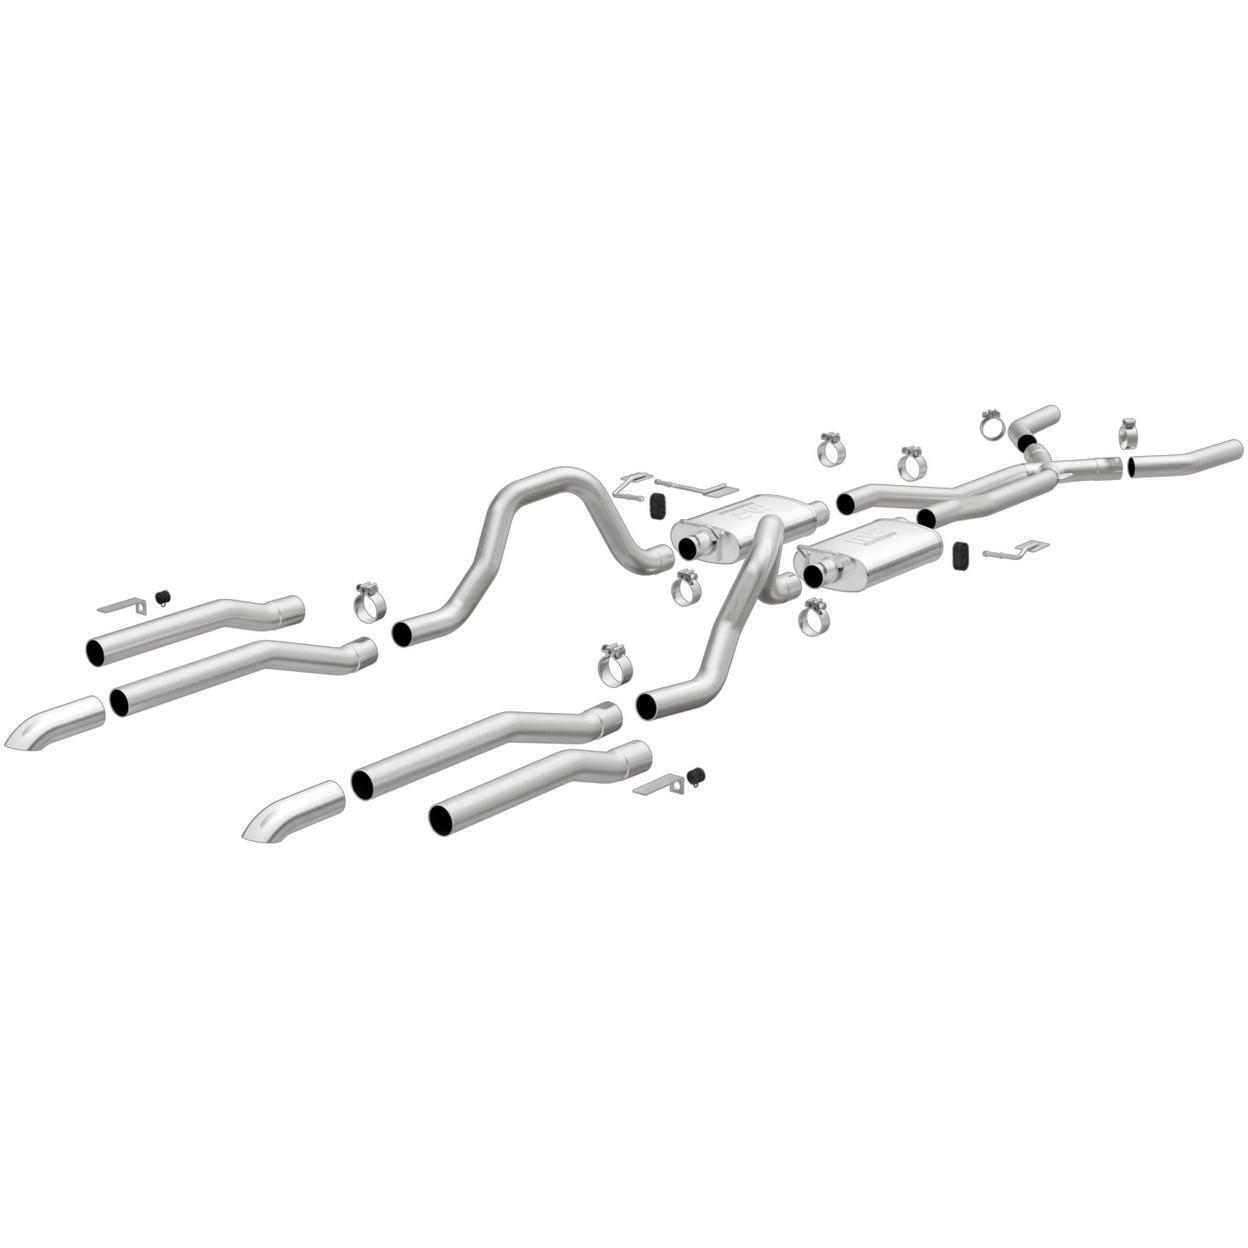 Exhaust System Kit for 1969-1972 Plymouth Satellite